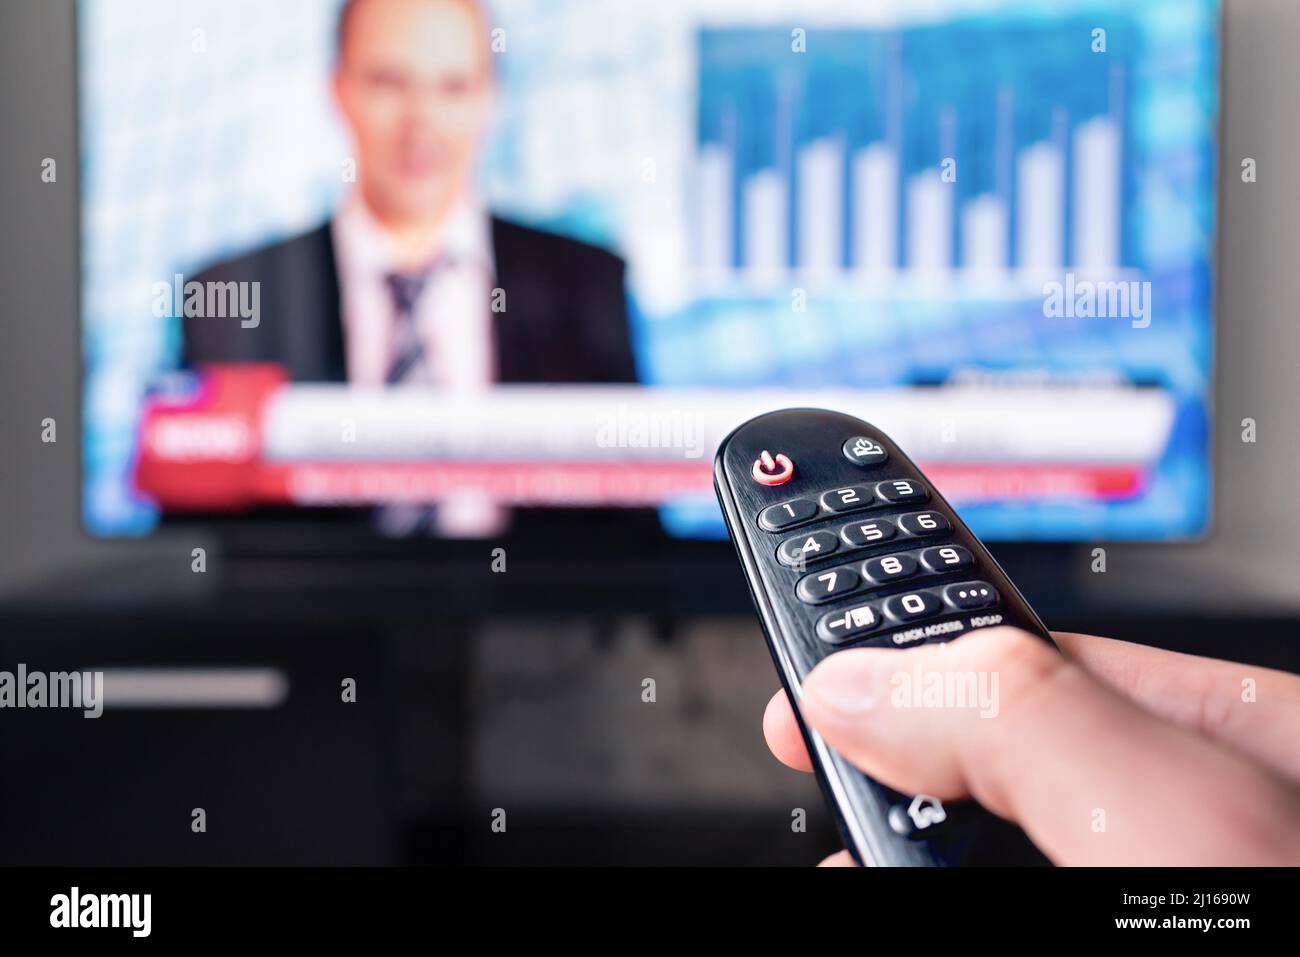 Tv news reporter in television screen and remote control. Man watching presenter, anchor or newsreader in studio. Breaking newstcast channel. Stock Photo